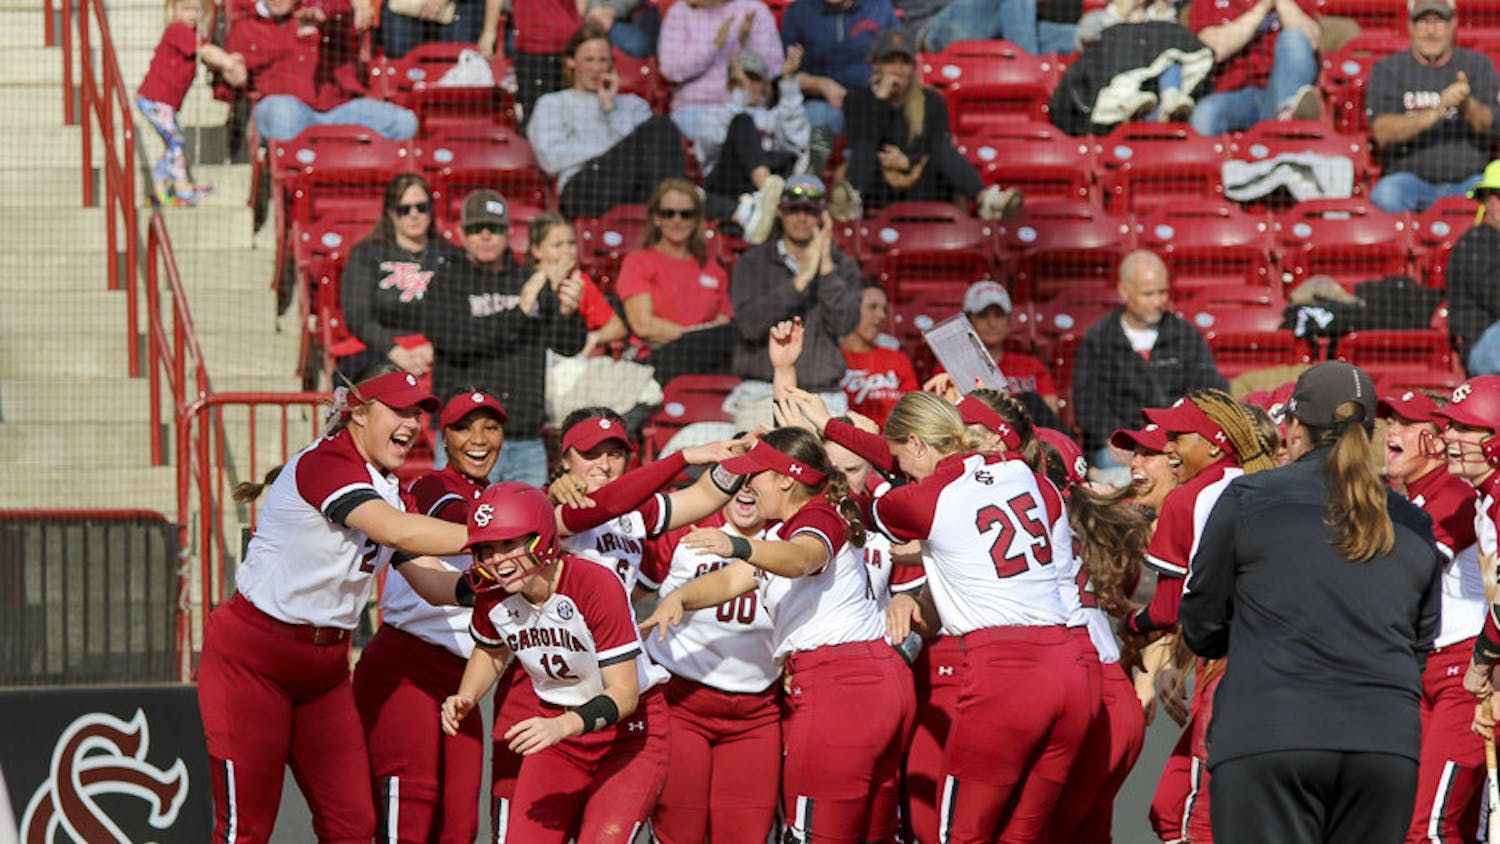 The Gamecock softball team celebrates after sophomore outfielder Marissa Gonzalez hits a grand slam during the matchup between South Carolina and Western Kentucky at Beckham Field on Feb. 19, 2023. The Gamecocks defeated the Hilltoppers 11-2.